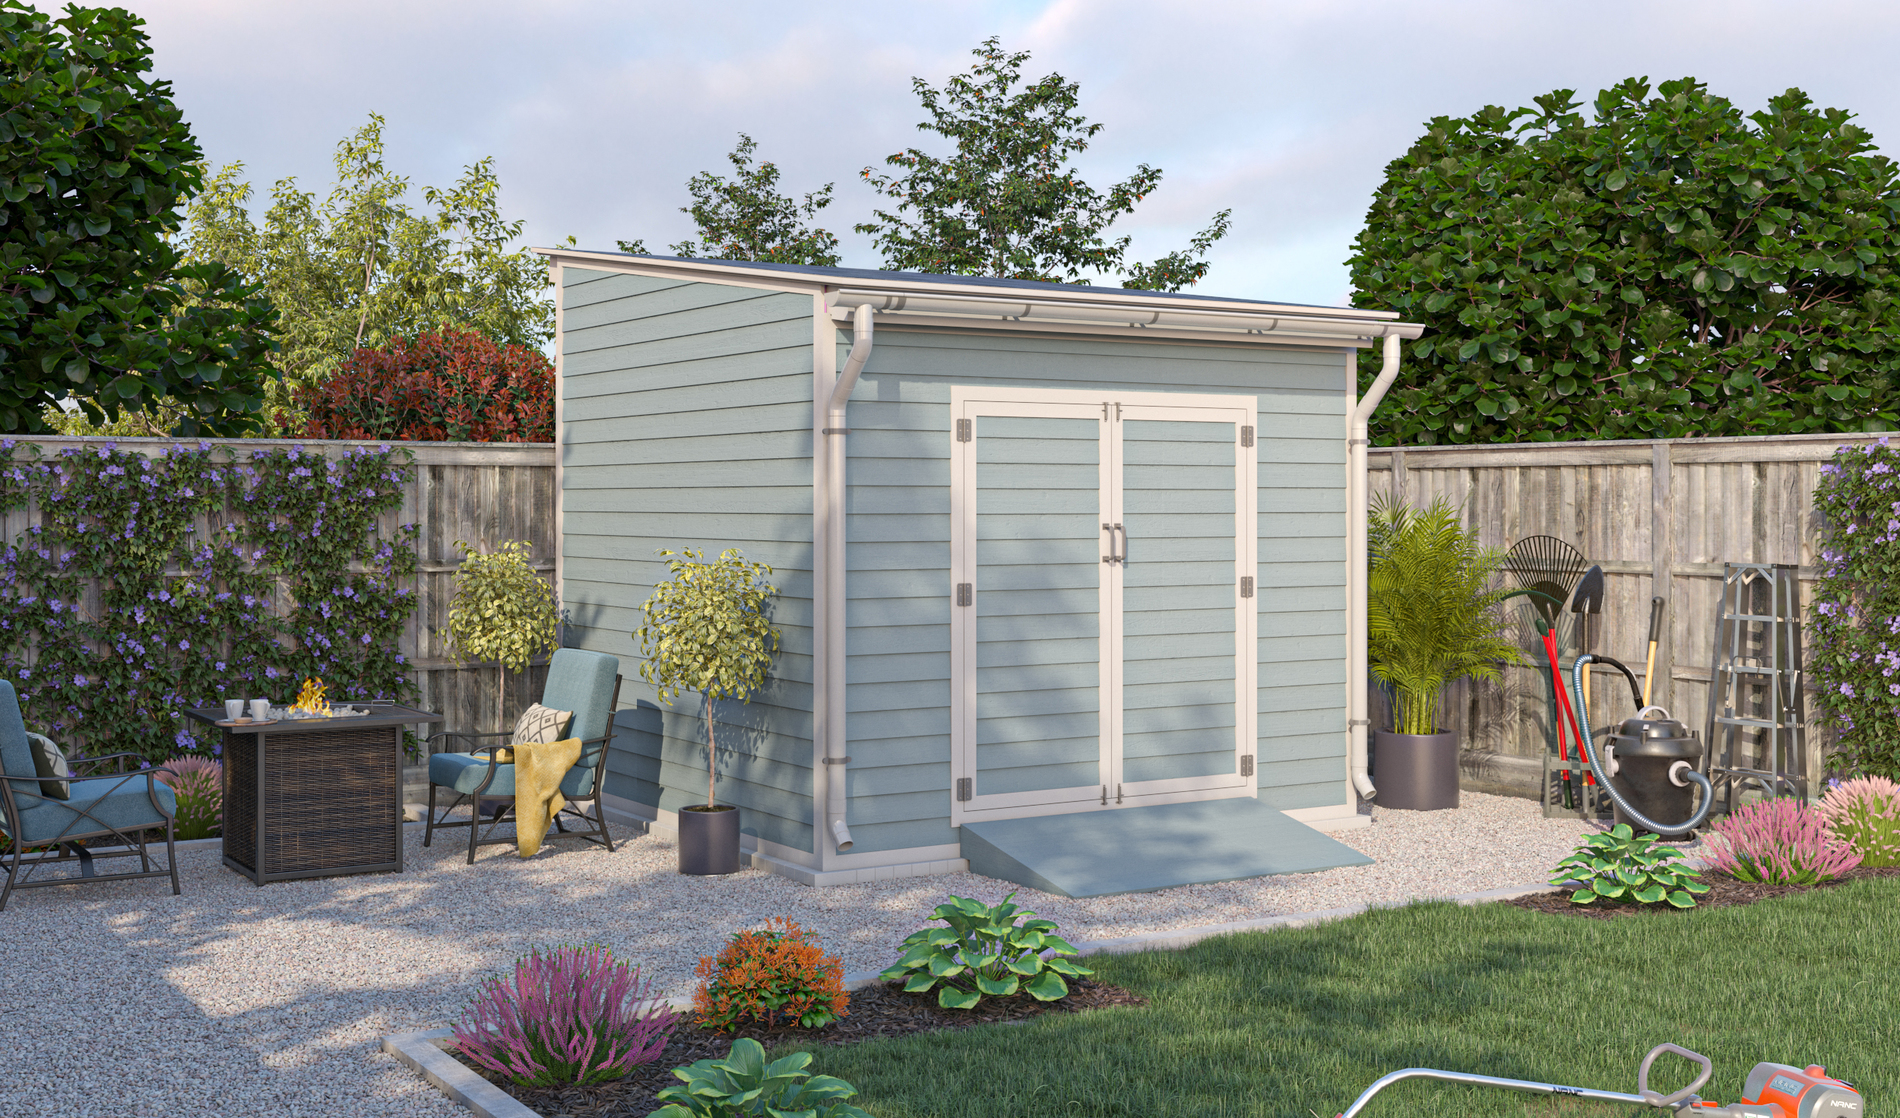 10x10 lean to storage shed preview